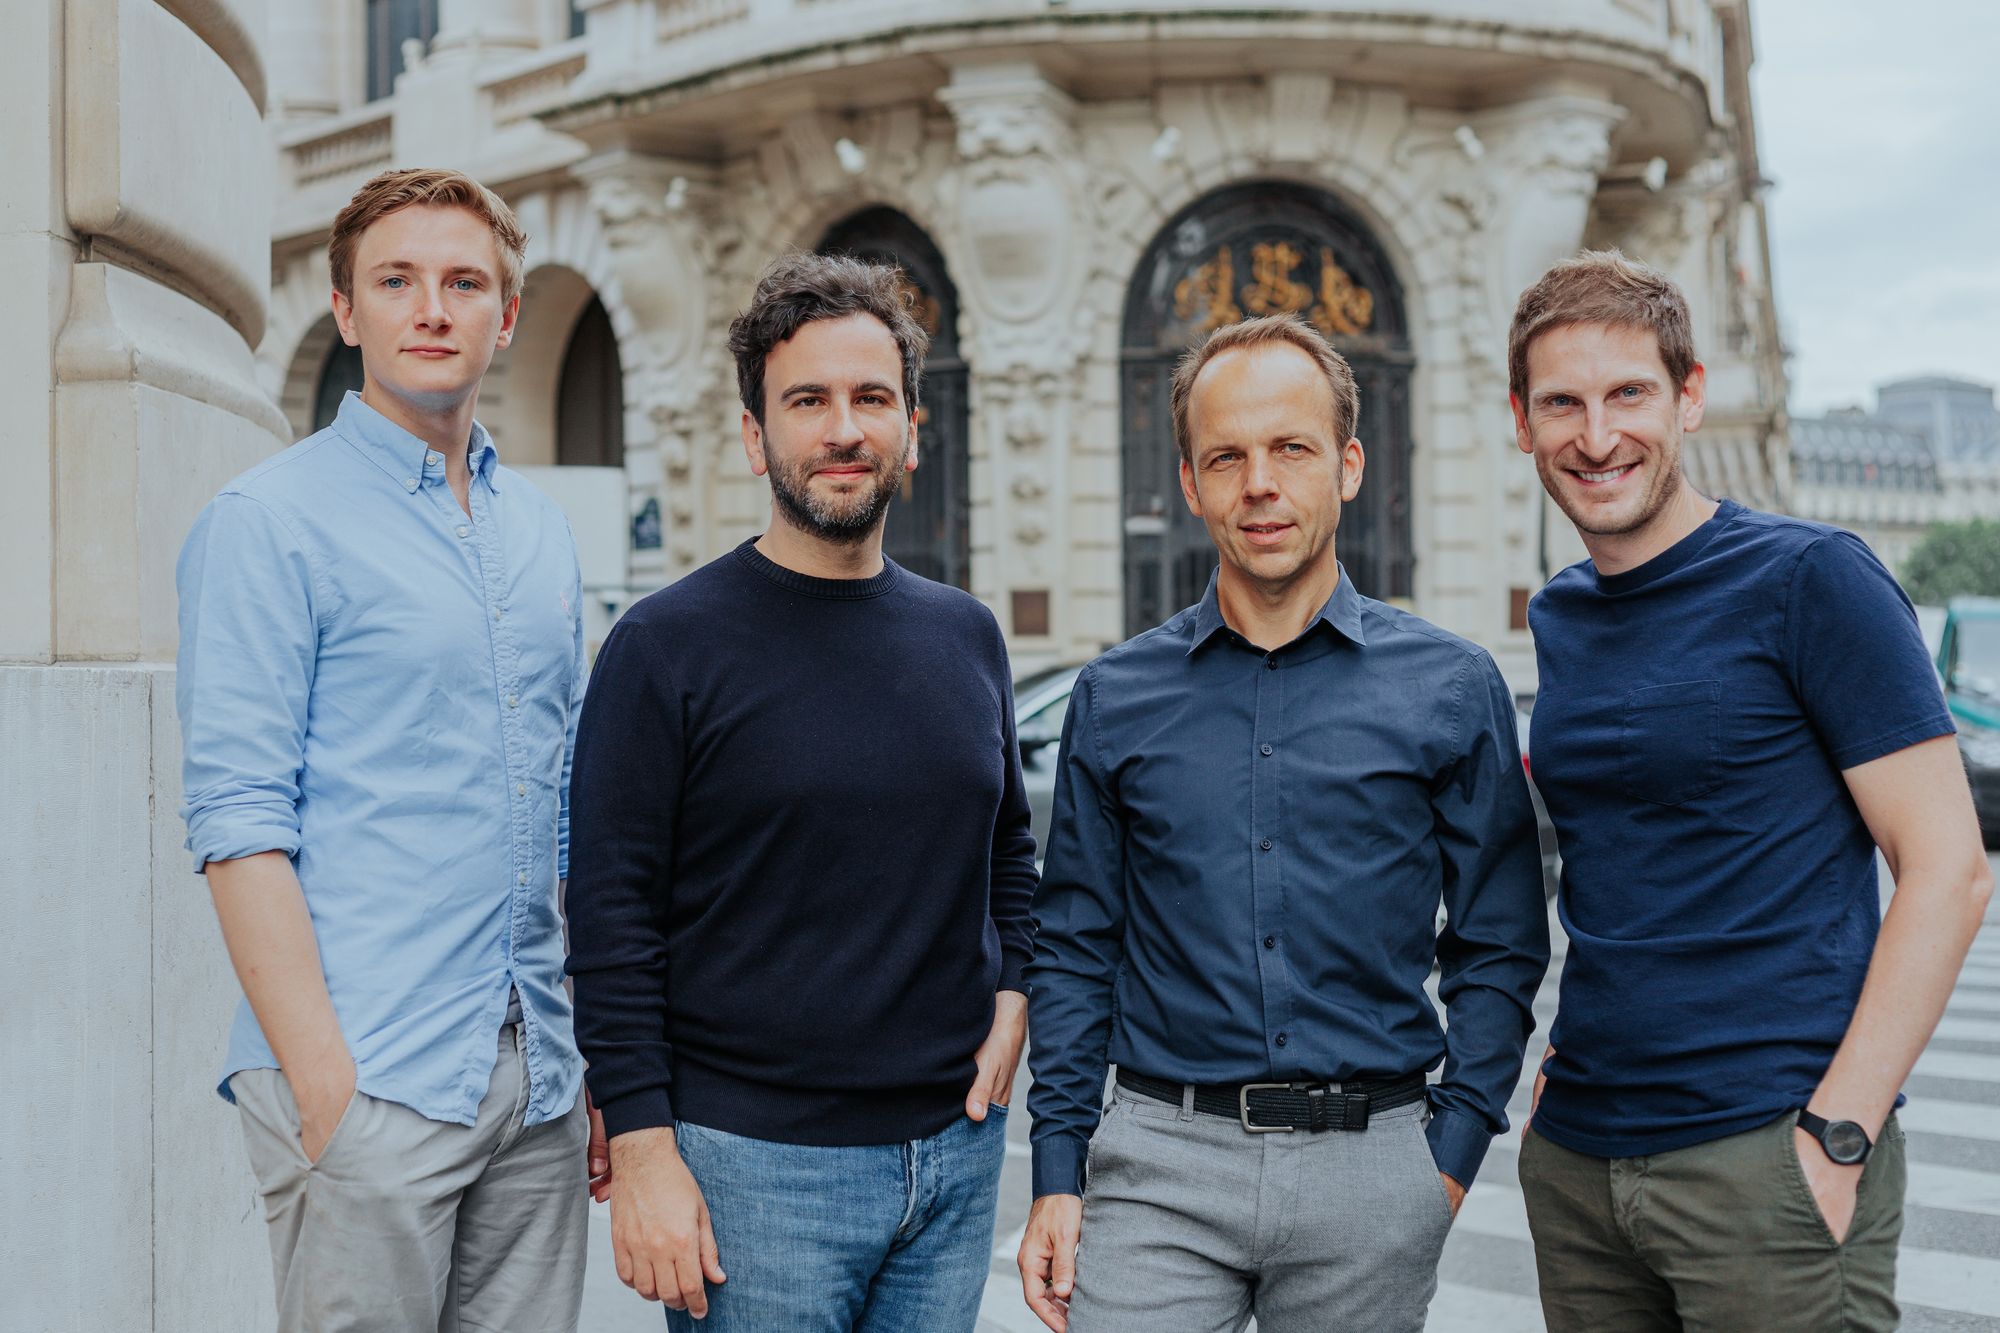 Lukas Zörner (Co-founder of Penta), Steve Anavi (co-founder and President of Qonto), Markus Pertlwieser (CEO of Penta), Alexandre Prot (co-founder and CEO of Qonto).